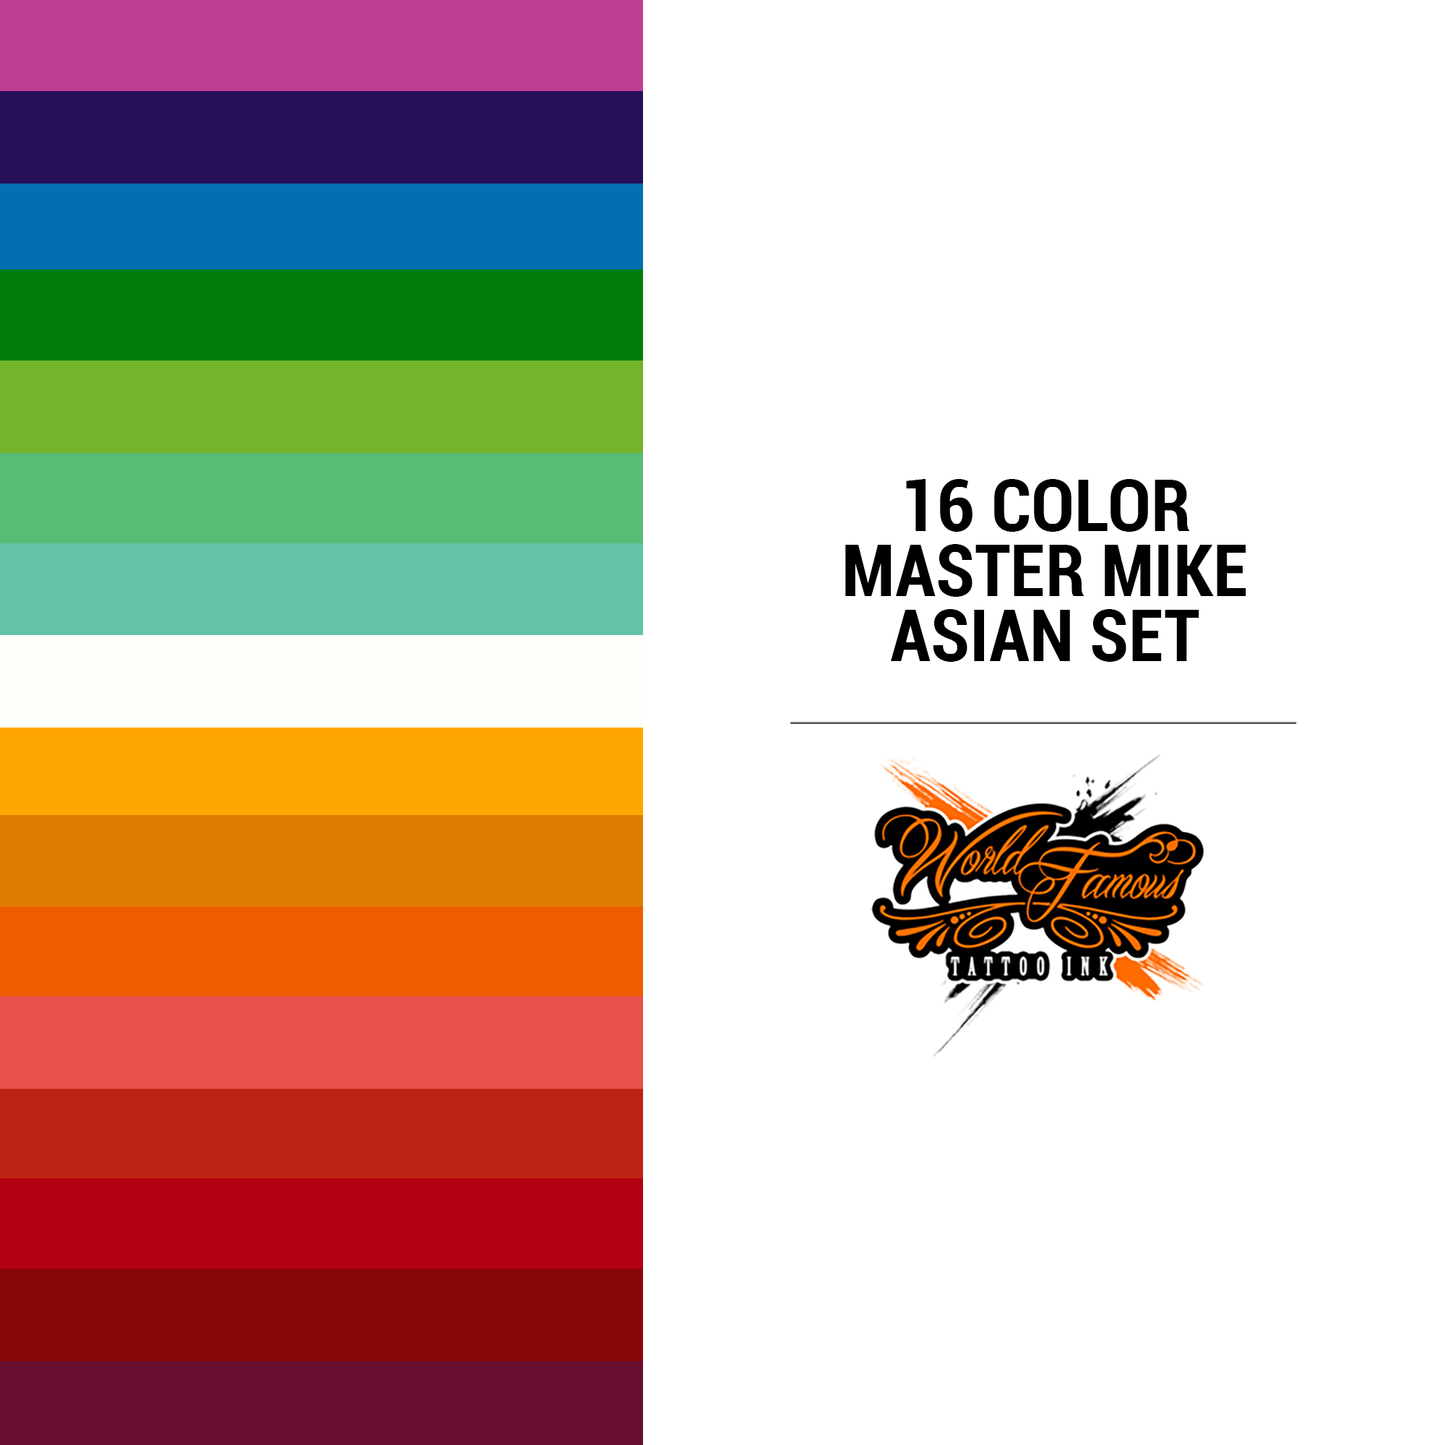 16 Color Master Mike Asian Set | World Famous Tattoo Ink